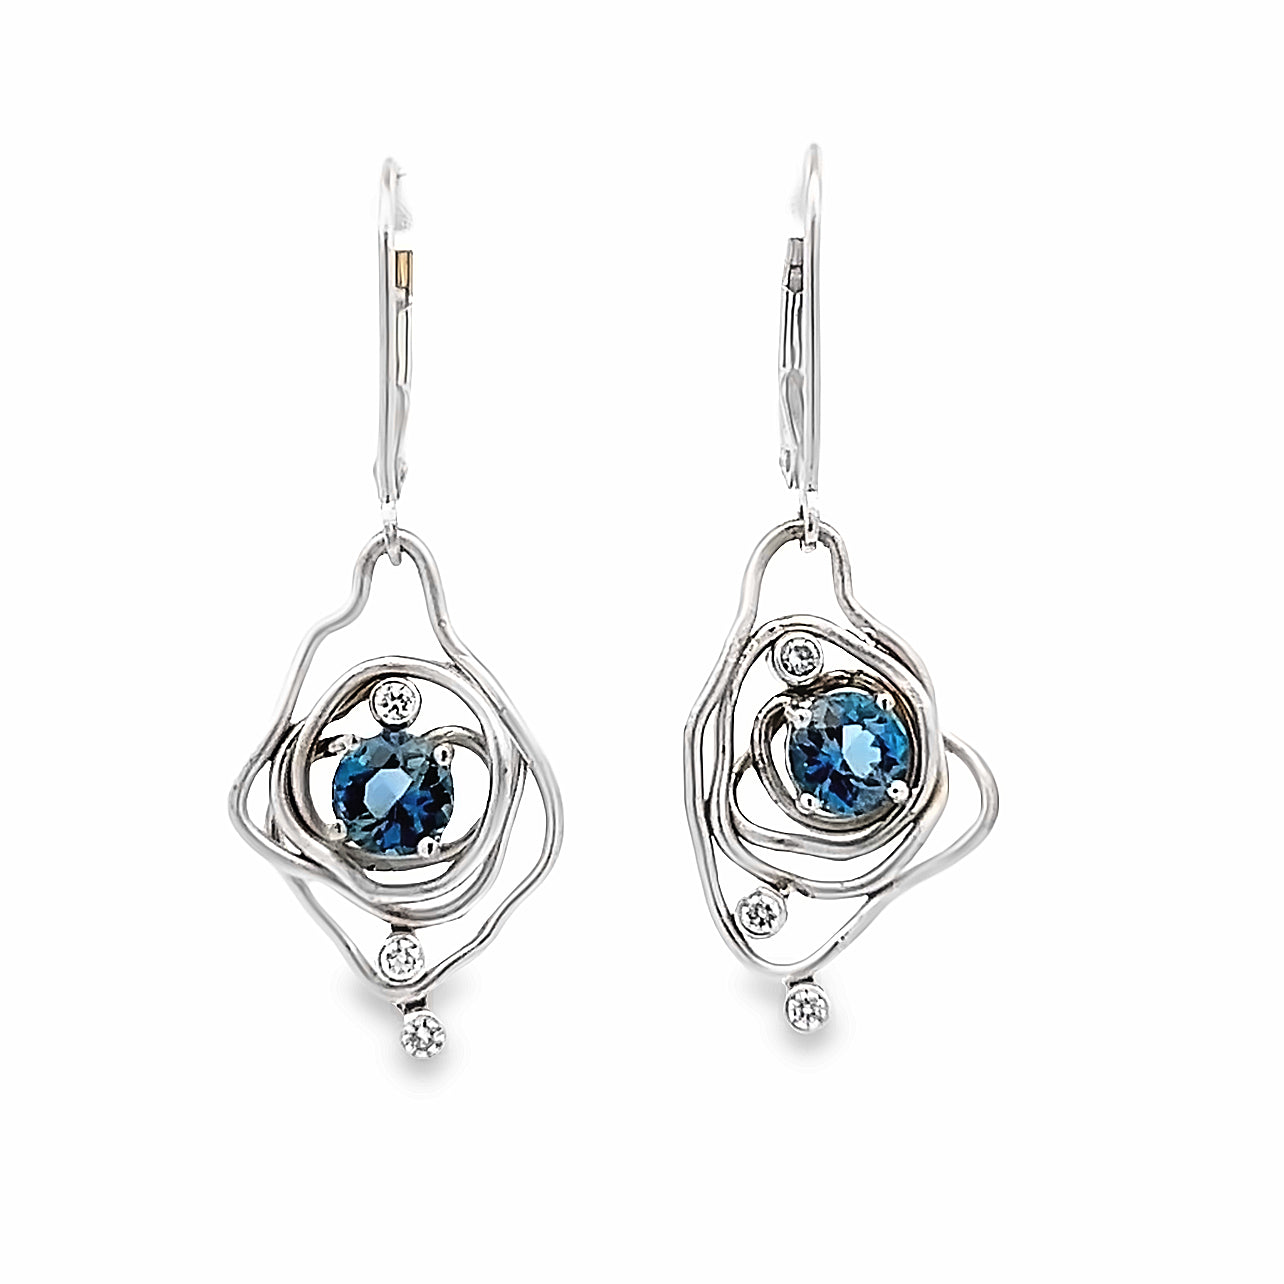 14k White Gold Round Aquamarine and Diamond Vines Earrings by Paul Richter (0.86ctw.)